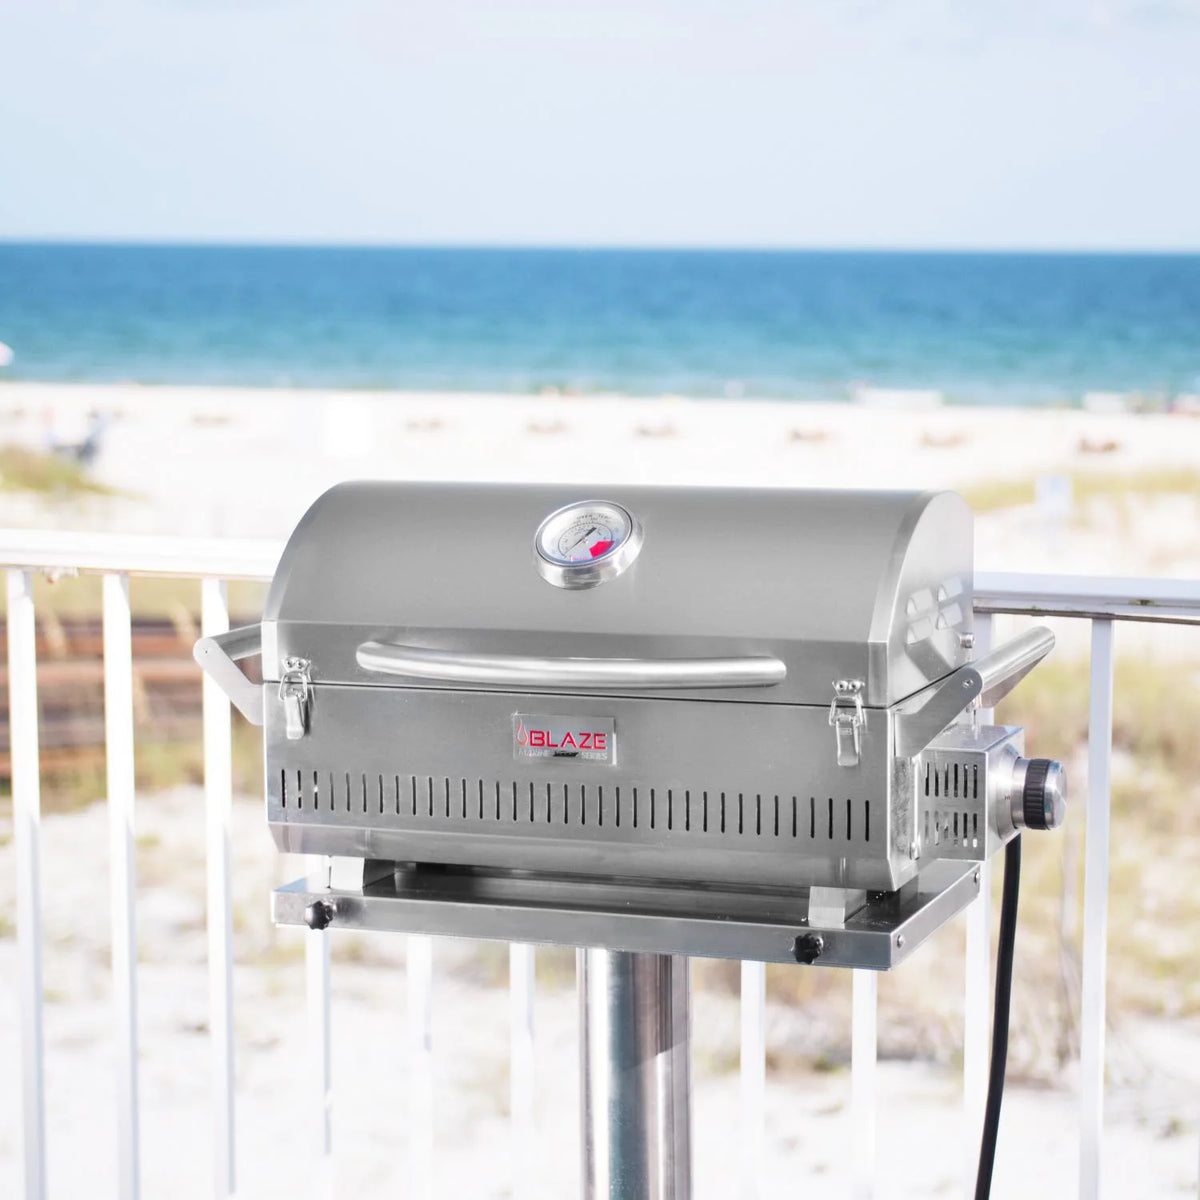 Blaze 10 Inch Marine Grade Portable Grill Pedestal Shown With Grill in Beach Side 